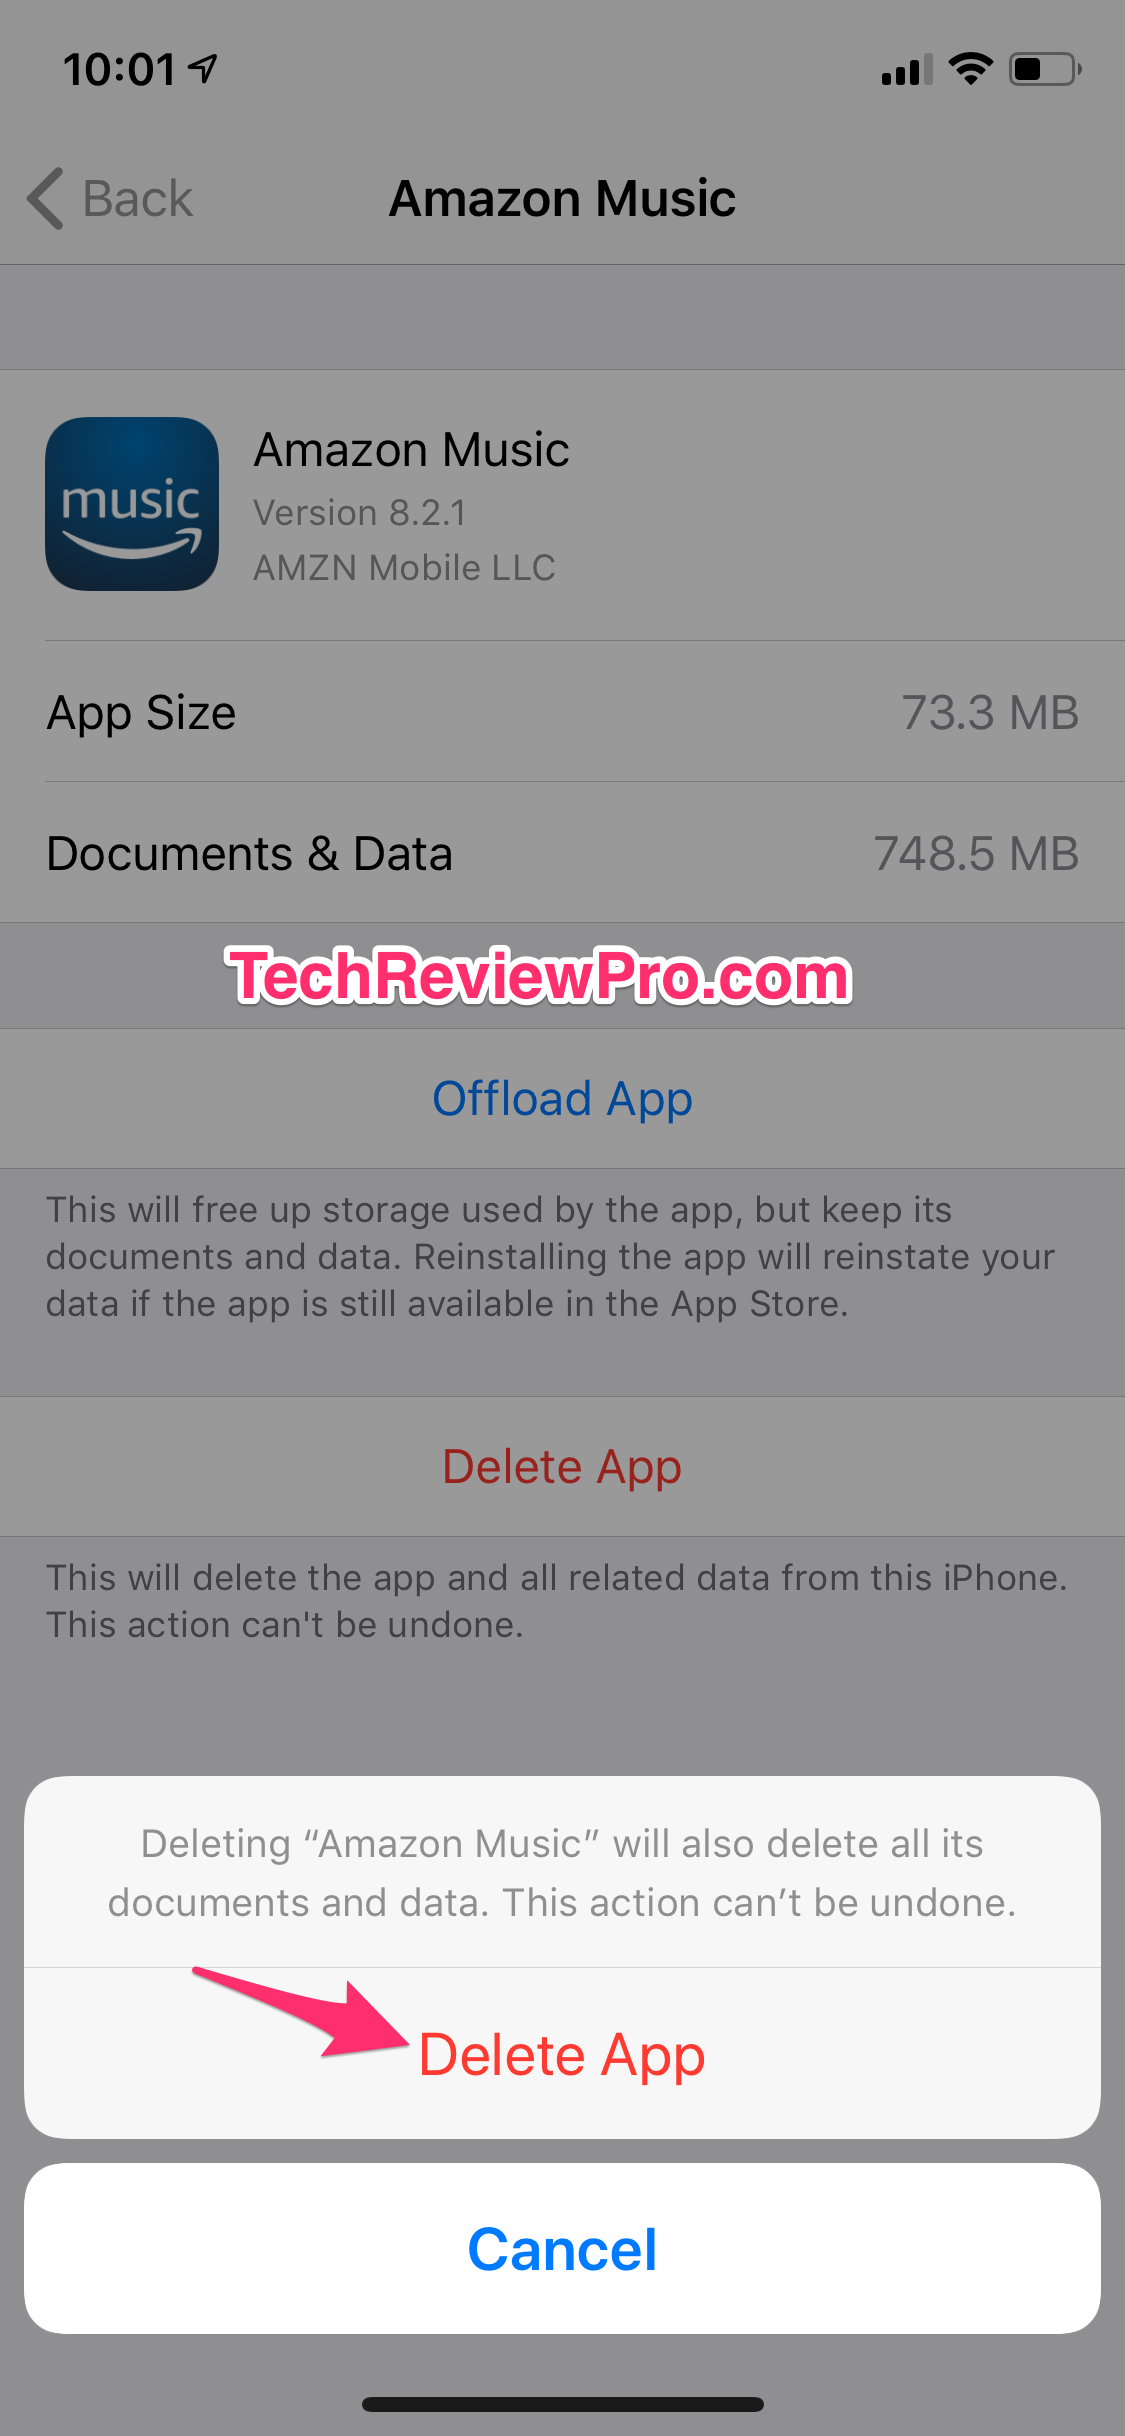 How to Delete Documents and Data Associated with An App on iPhone